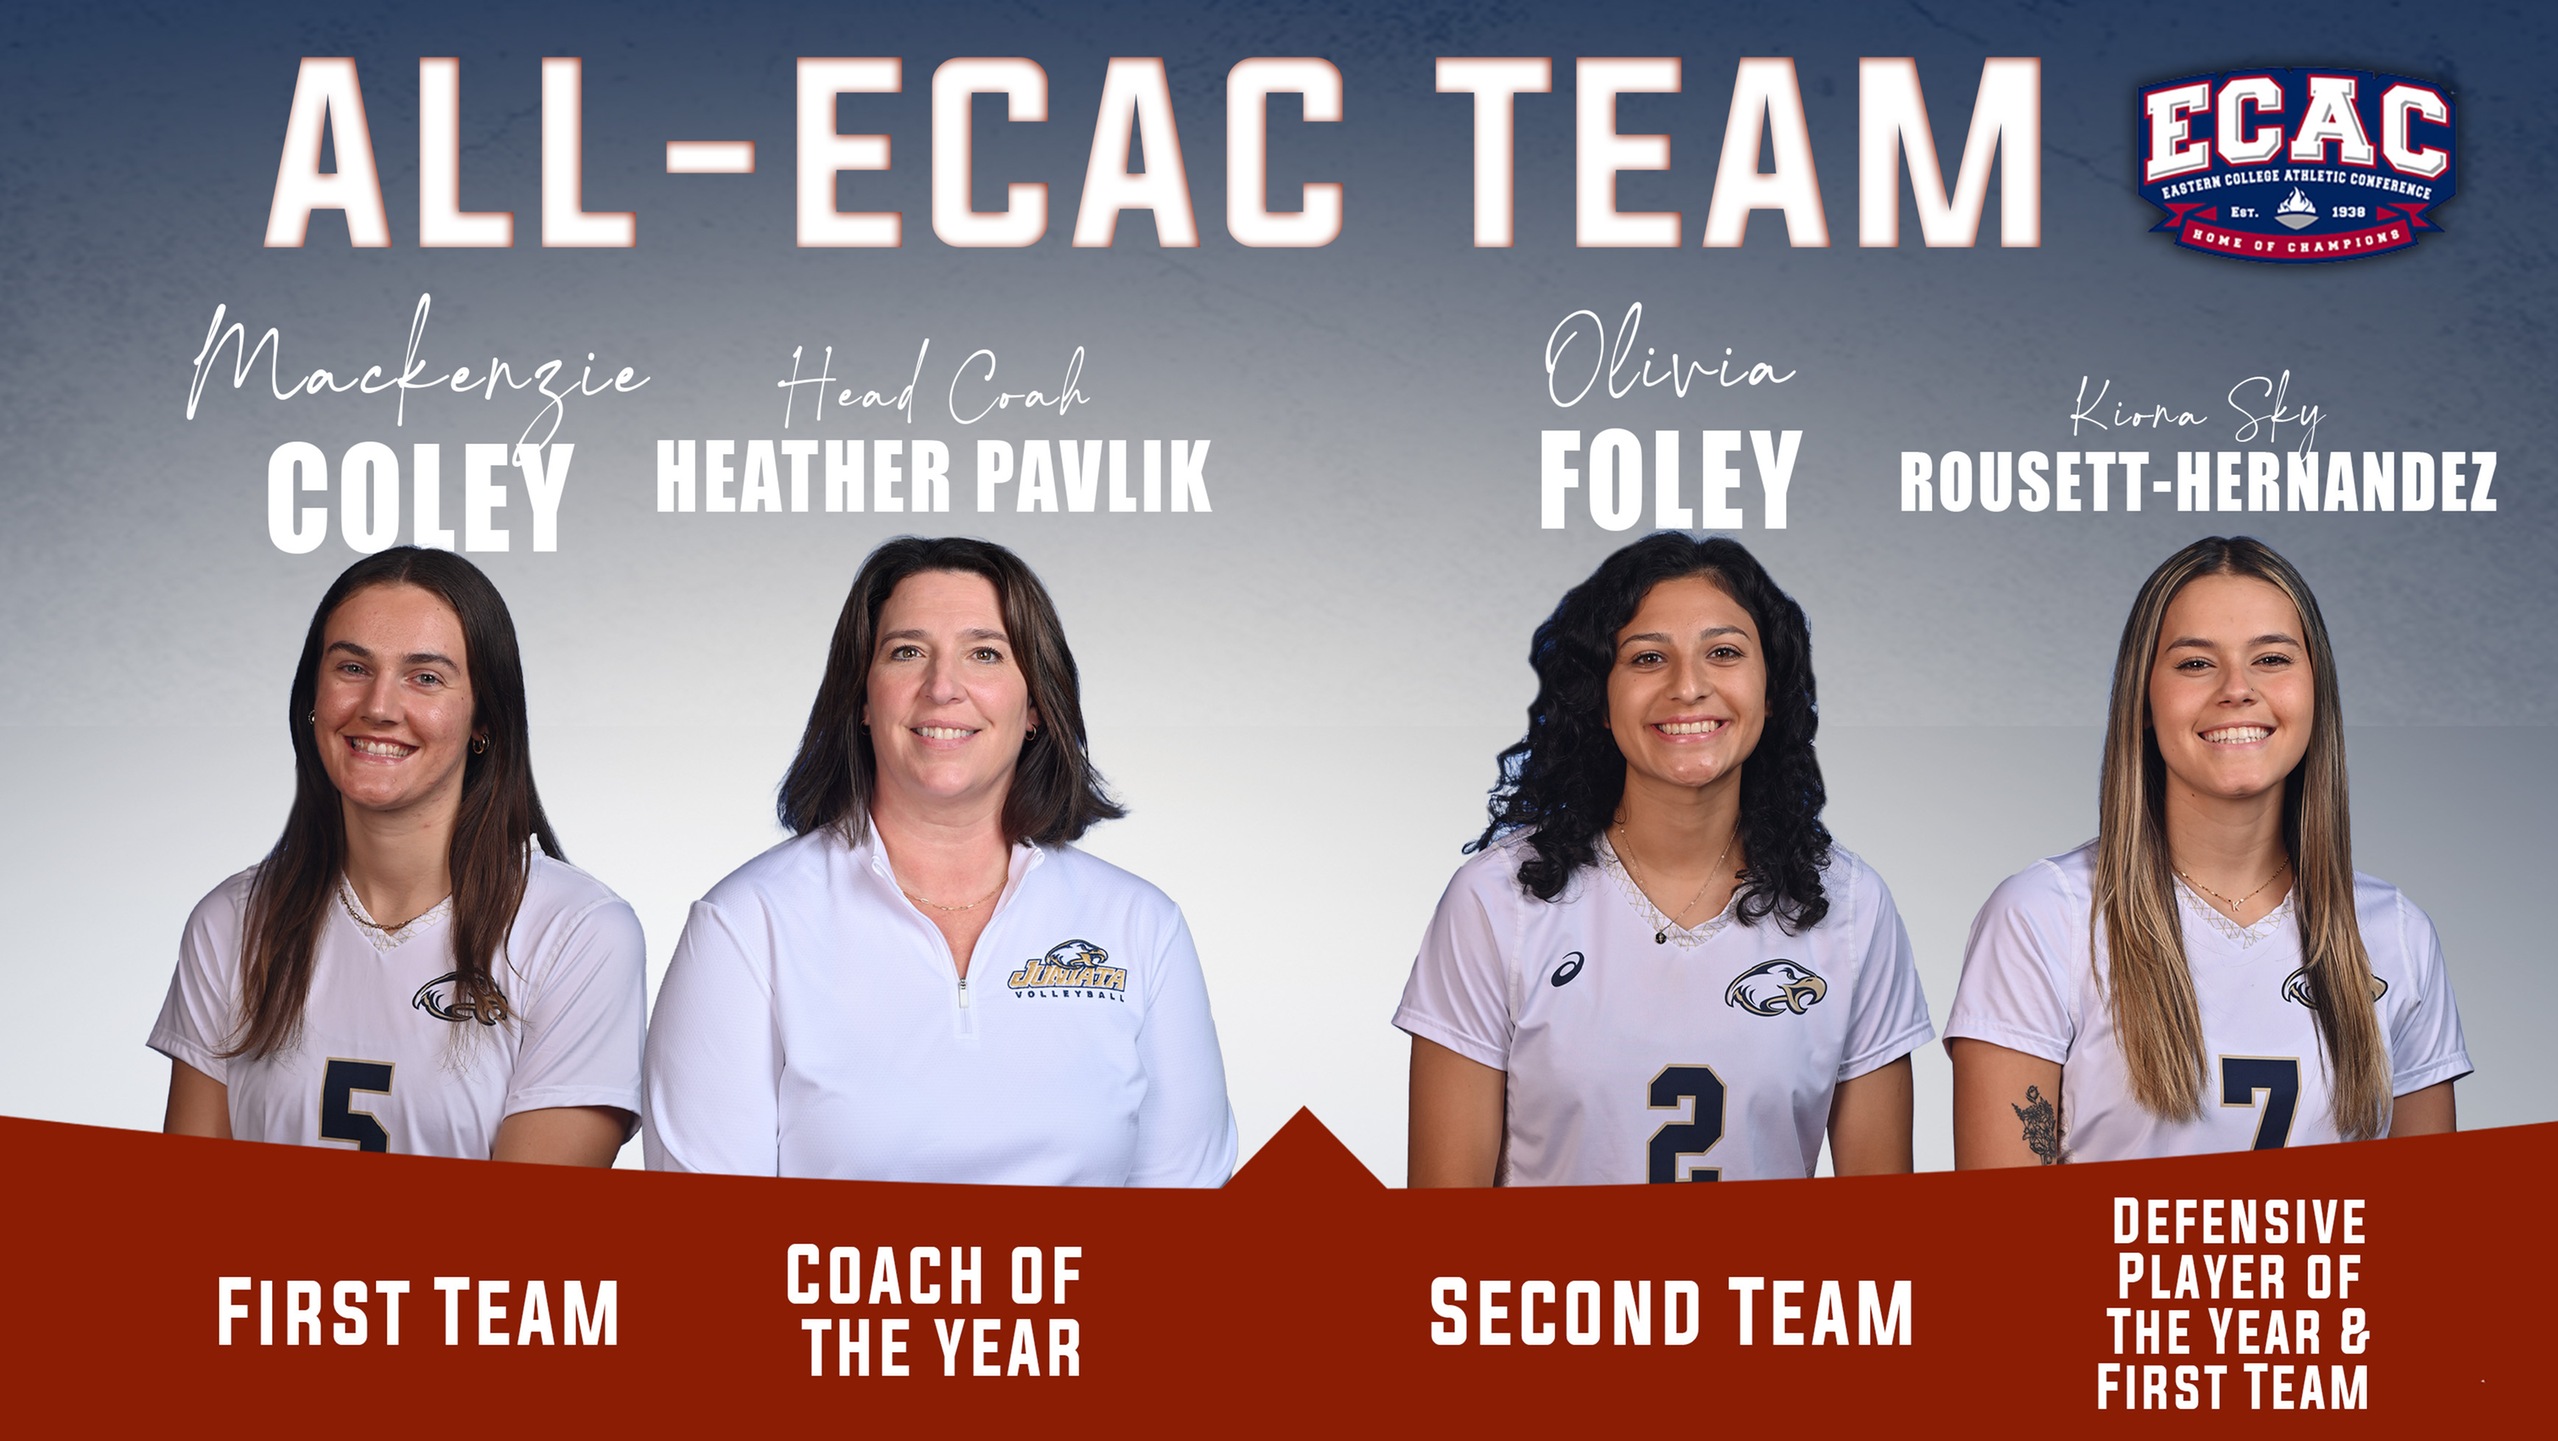 Eagles Earn All-ECAC Defensive Specialist of the Year, Coach of the Year, Three All-ECAC Team honors